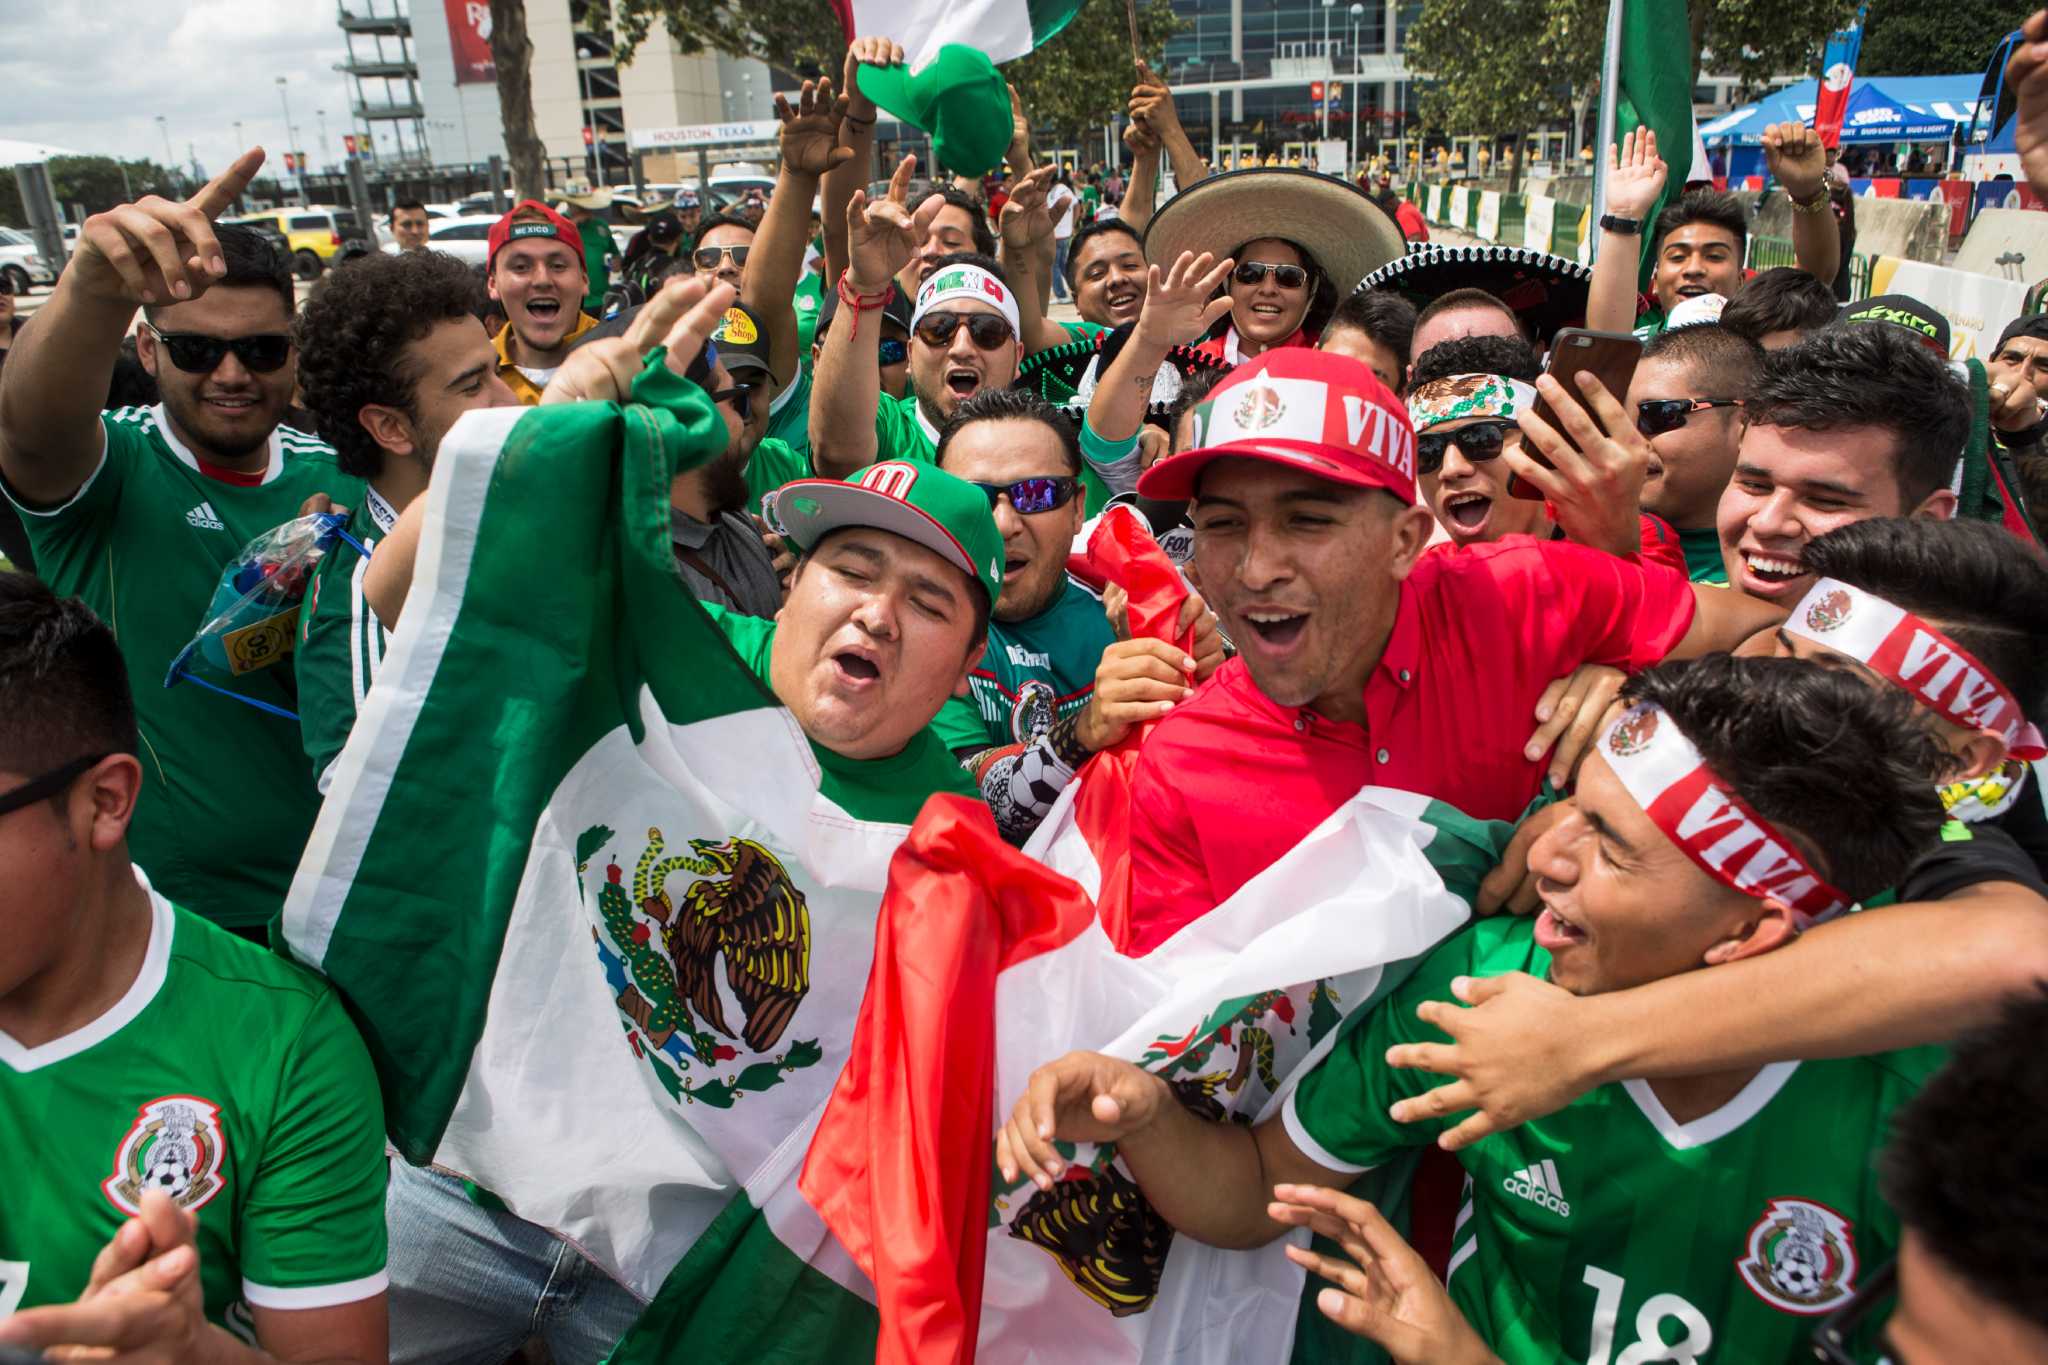 Mexico highlights Wednesday's trio of soccer games in Houston